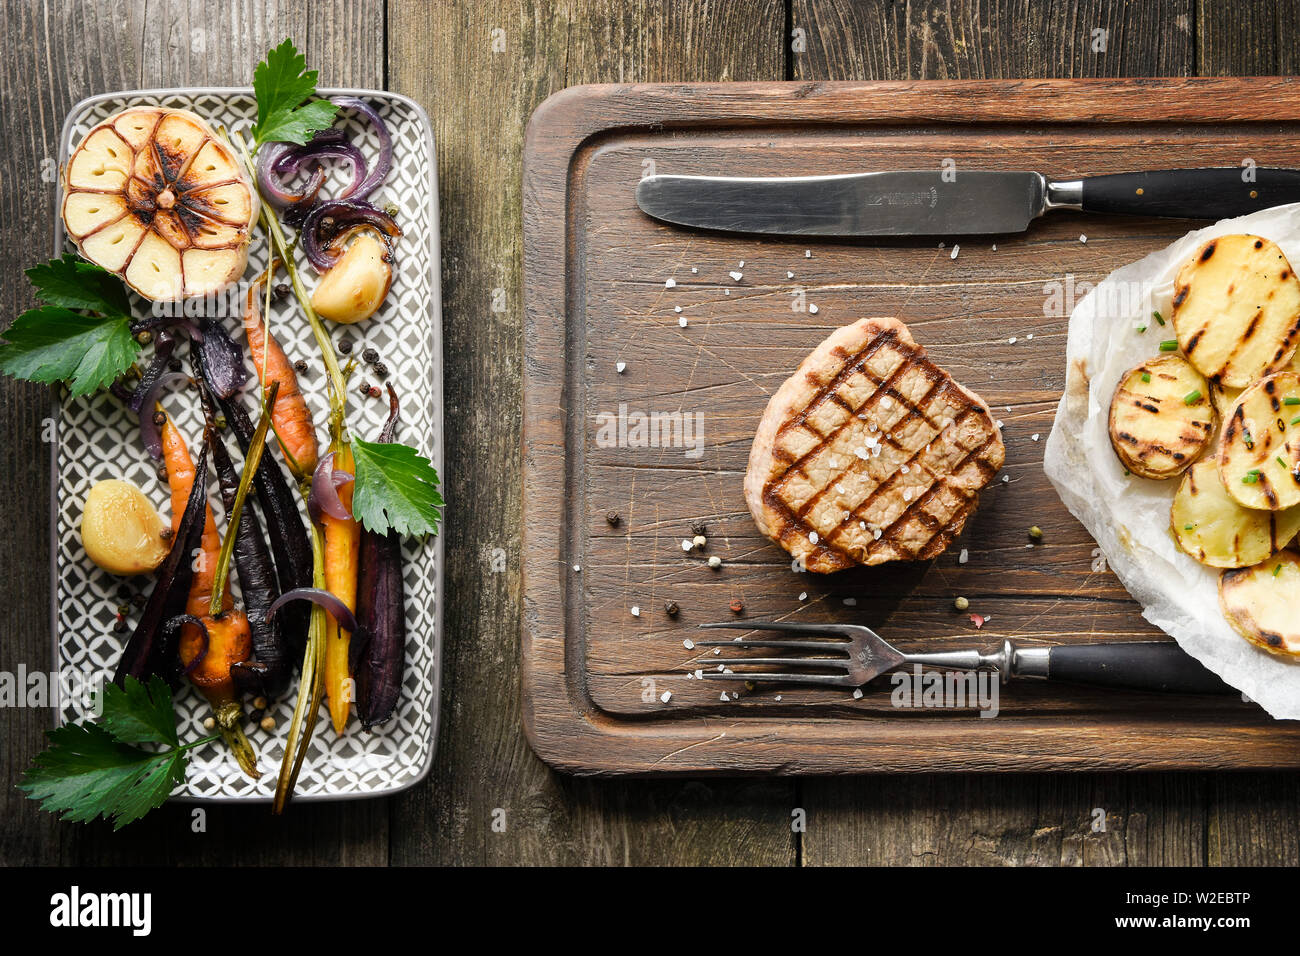 Steak and grilled vegetables from above on wood table Stock Photo